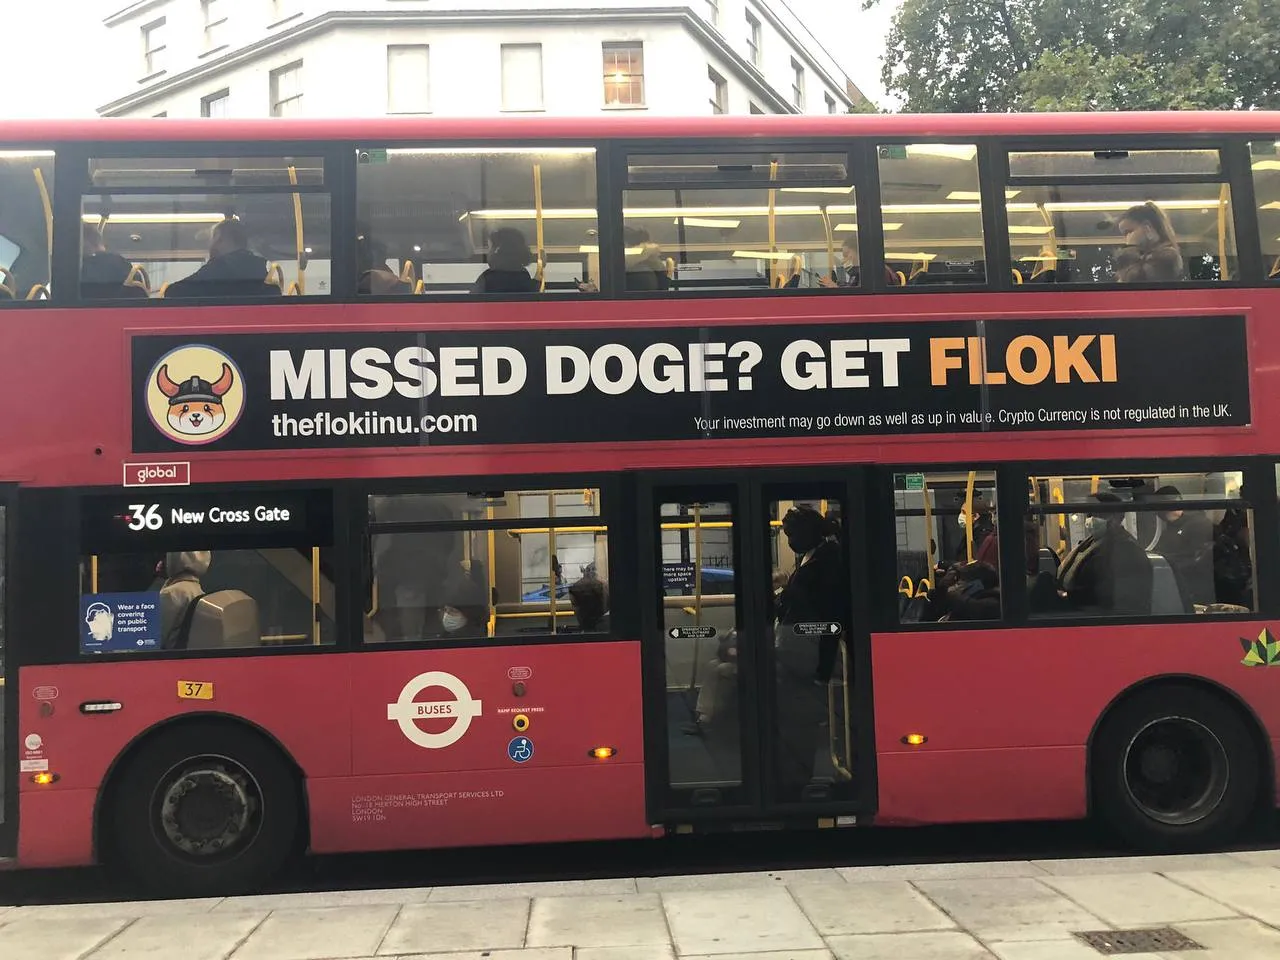 A BOSS ad on a London bus.